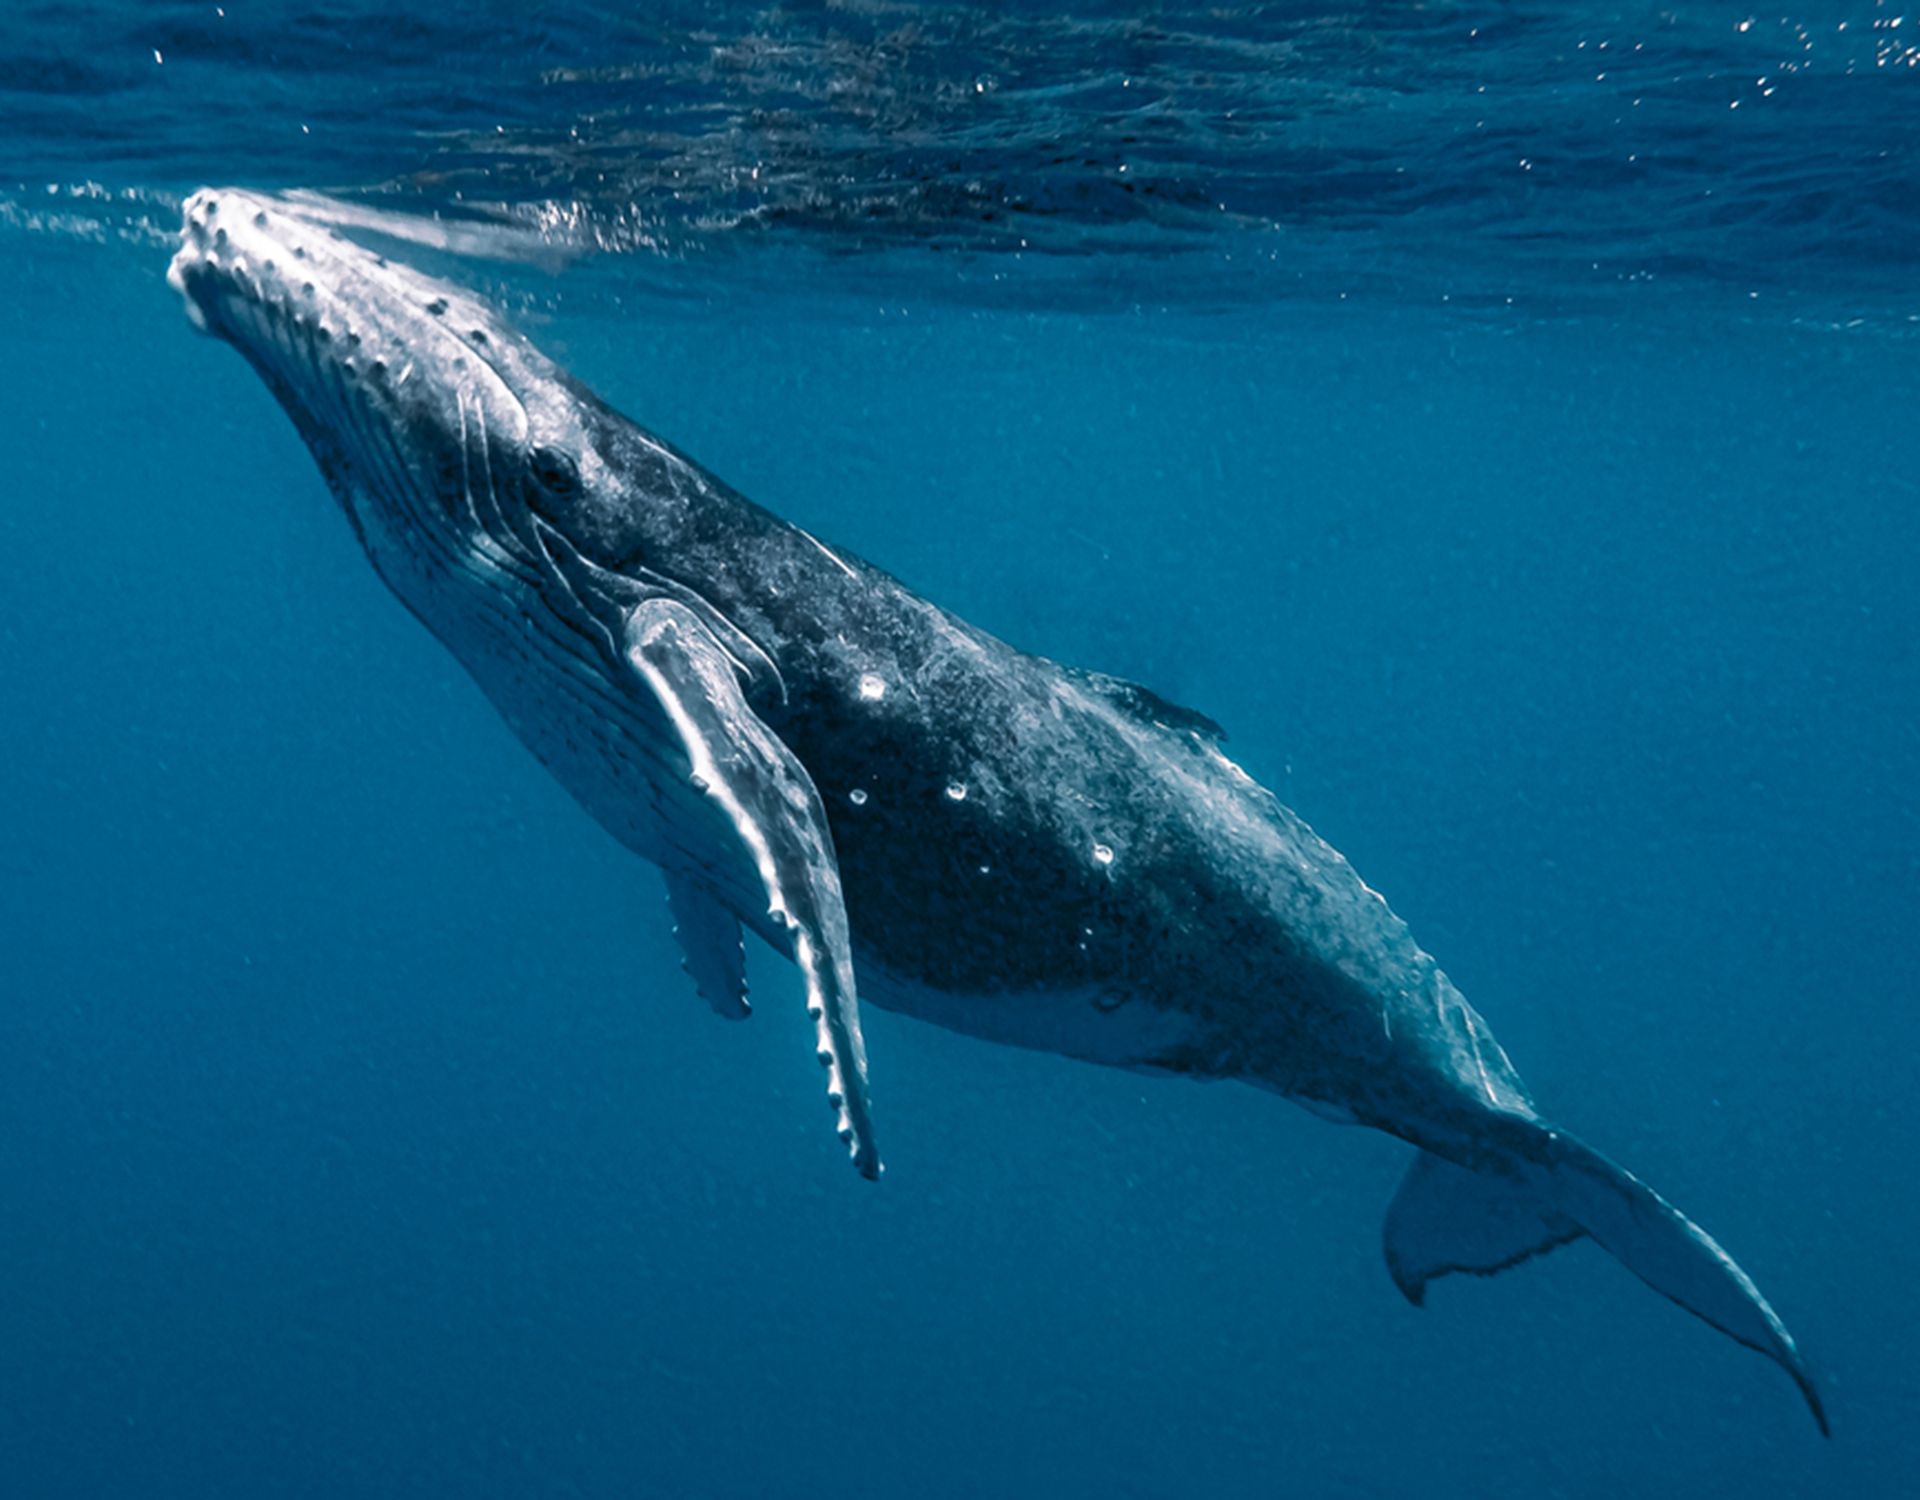 A whale rests close to the water’s surface